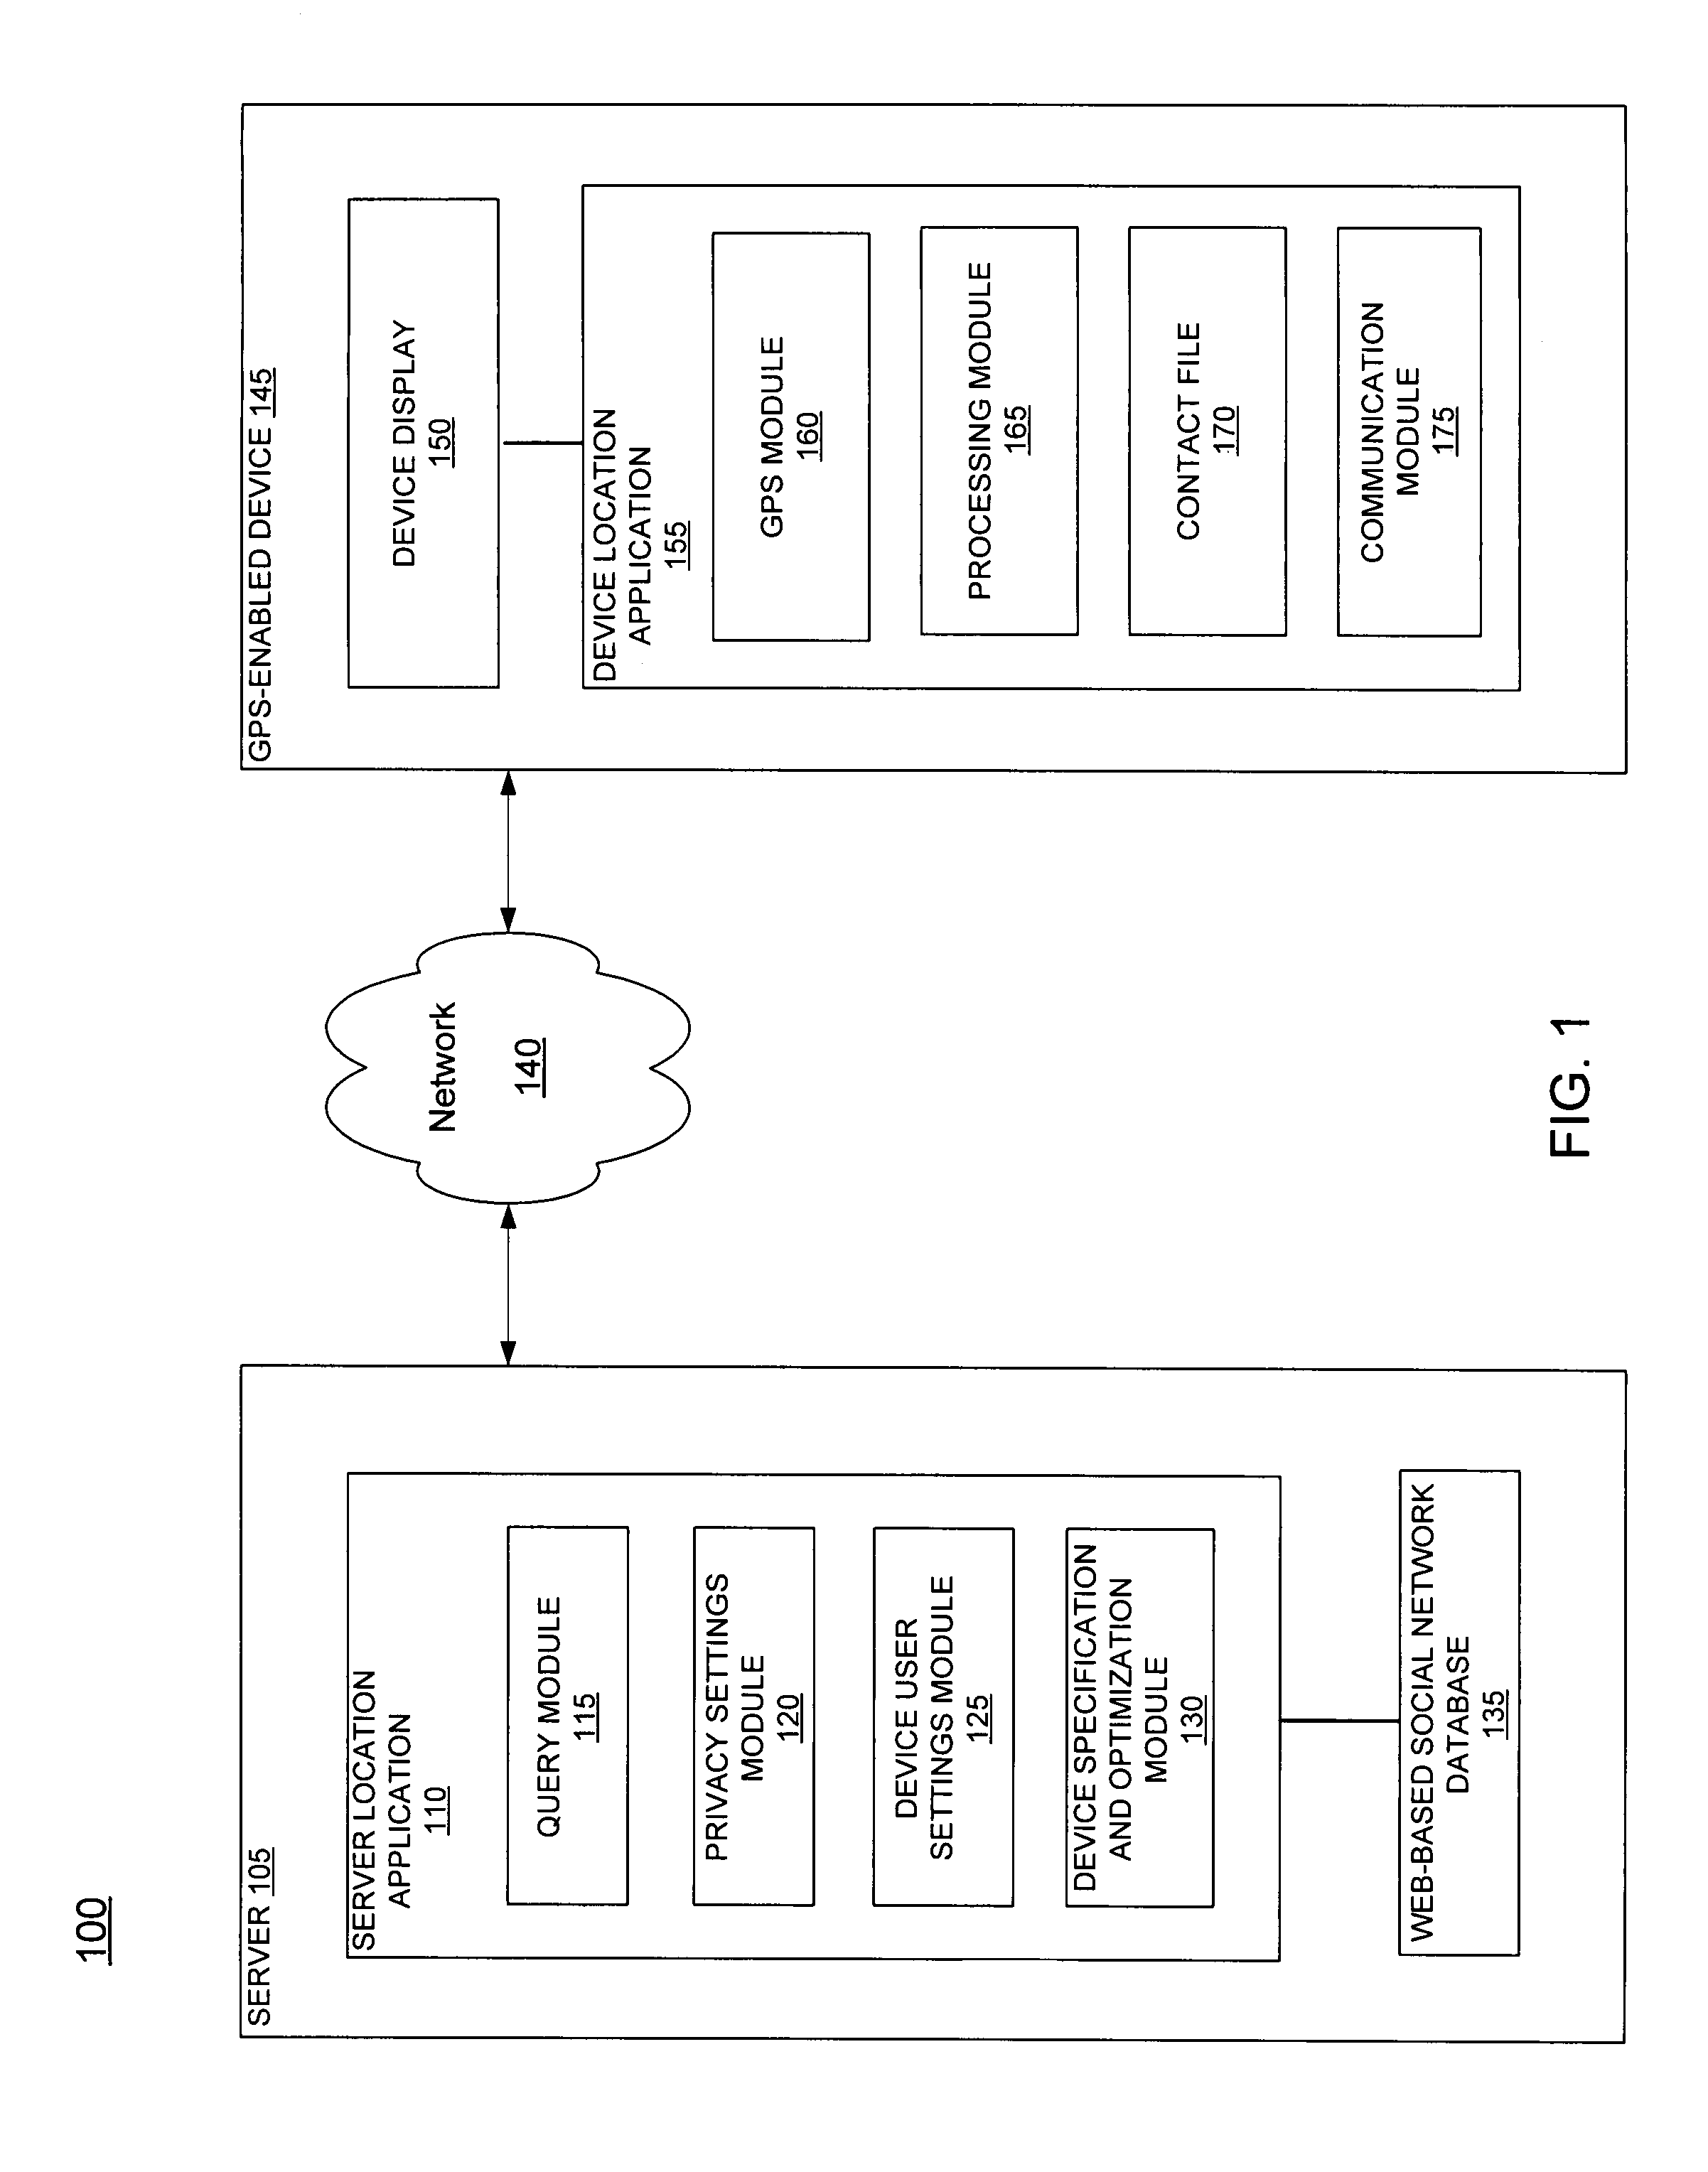 Systems and methods for automatically locating web-based social network members